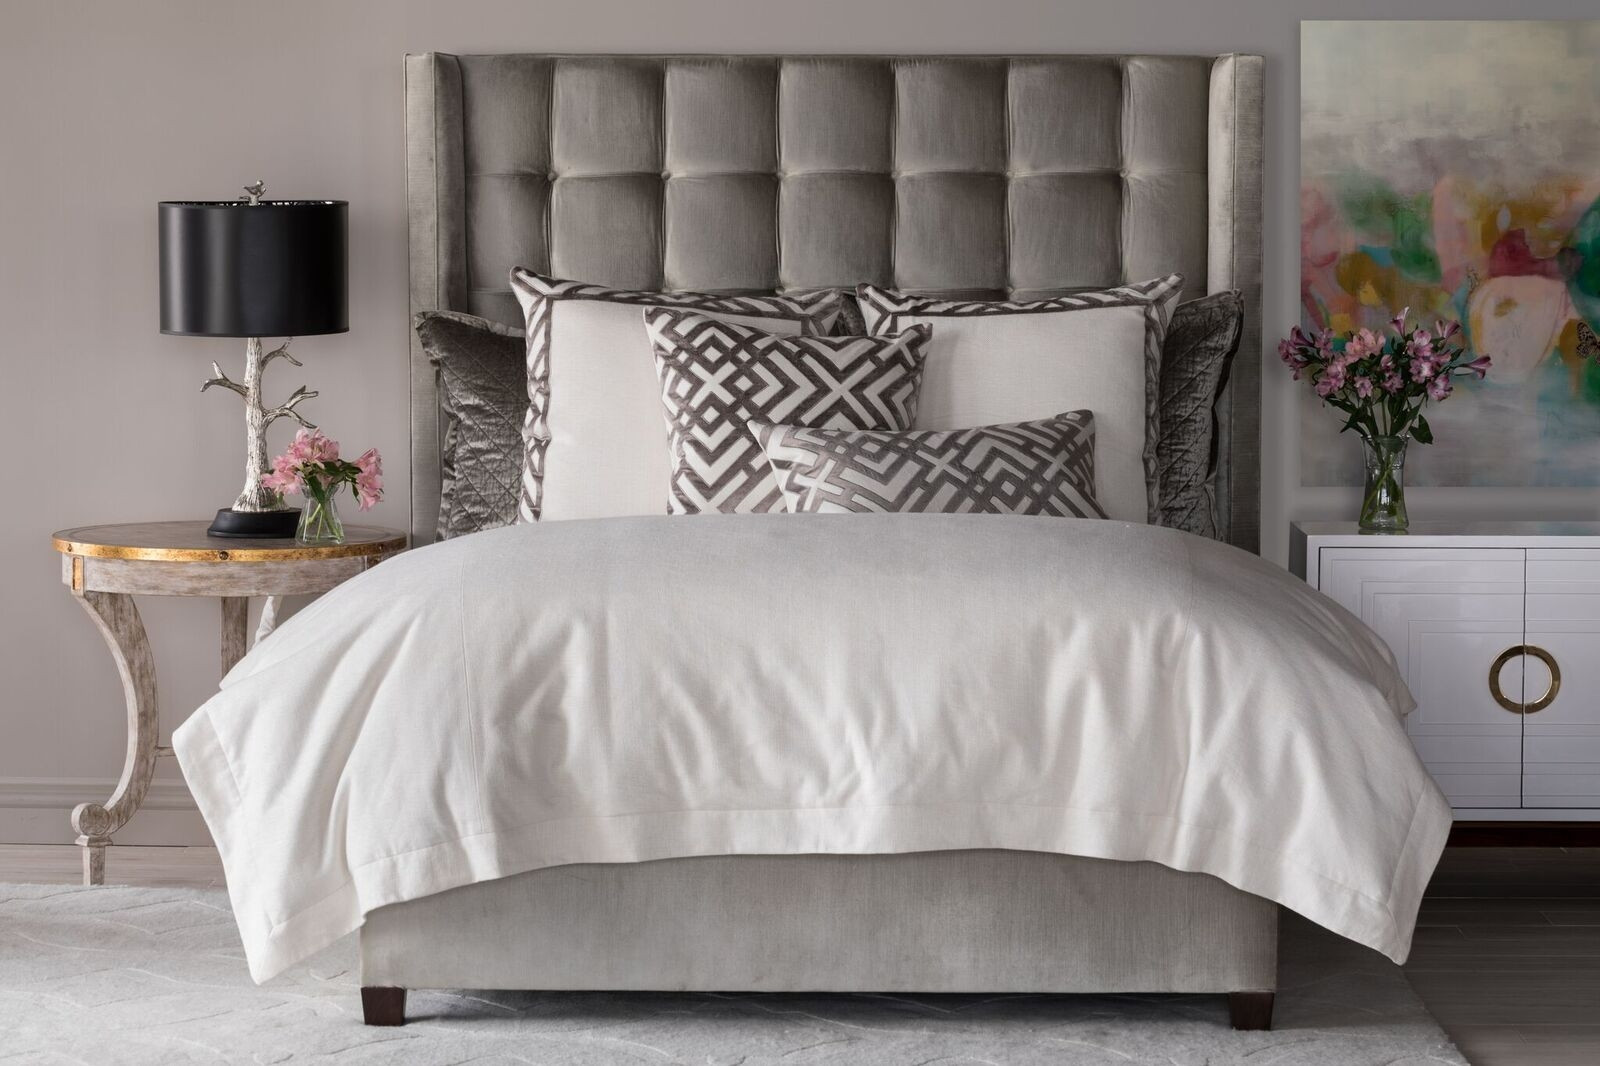 Laurie King Duvet Luxury Bedding Made with Ivory Basketweave. Duvet Insert Not Included.